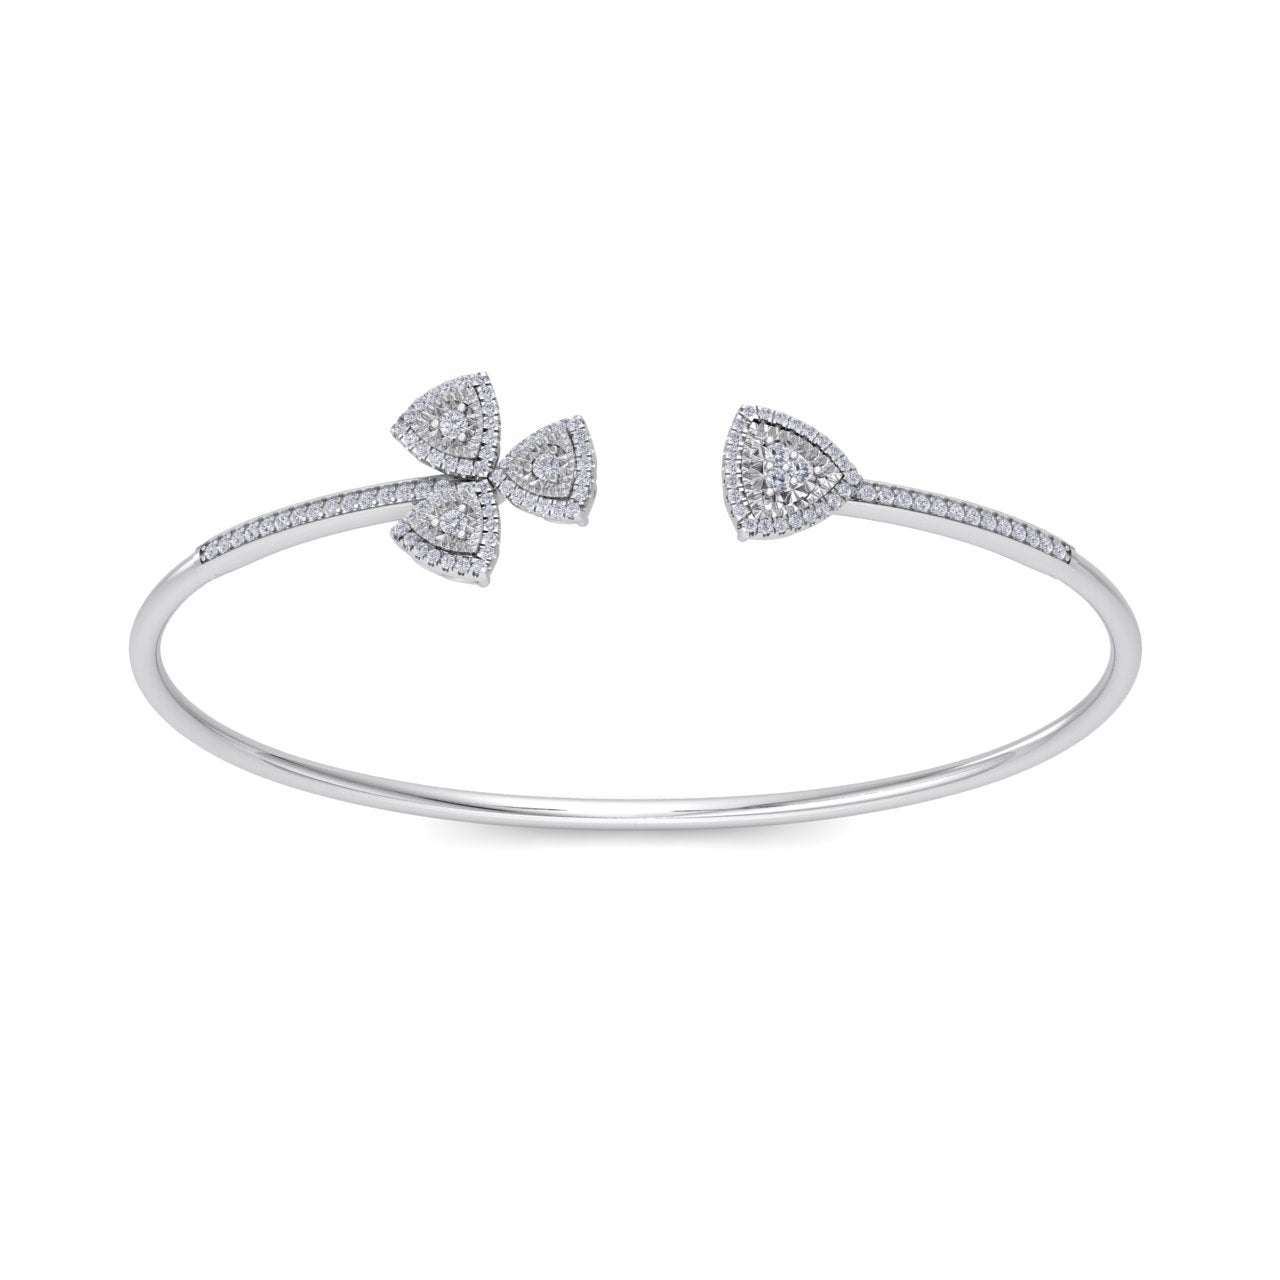 Bracelet in white gold with white diamonds of 0.53 ct in weight